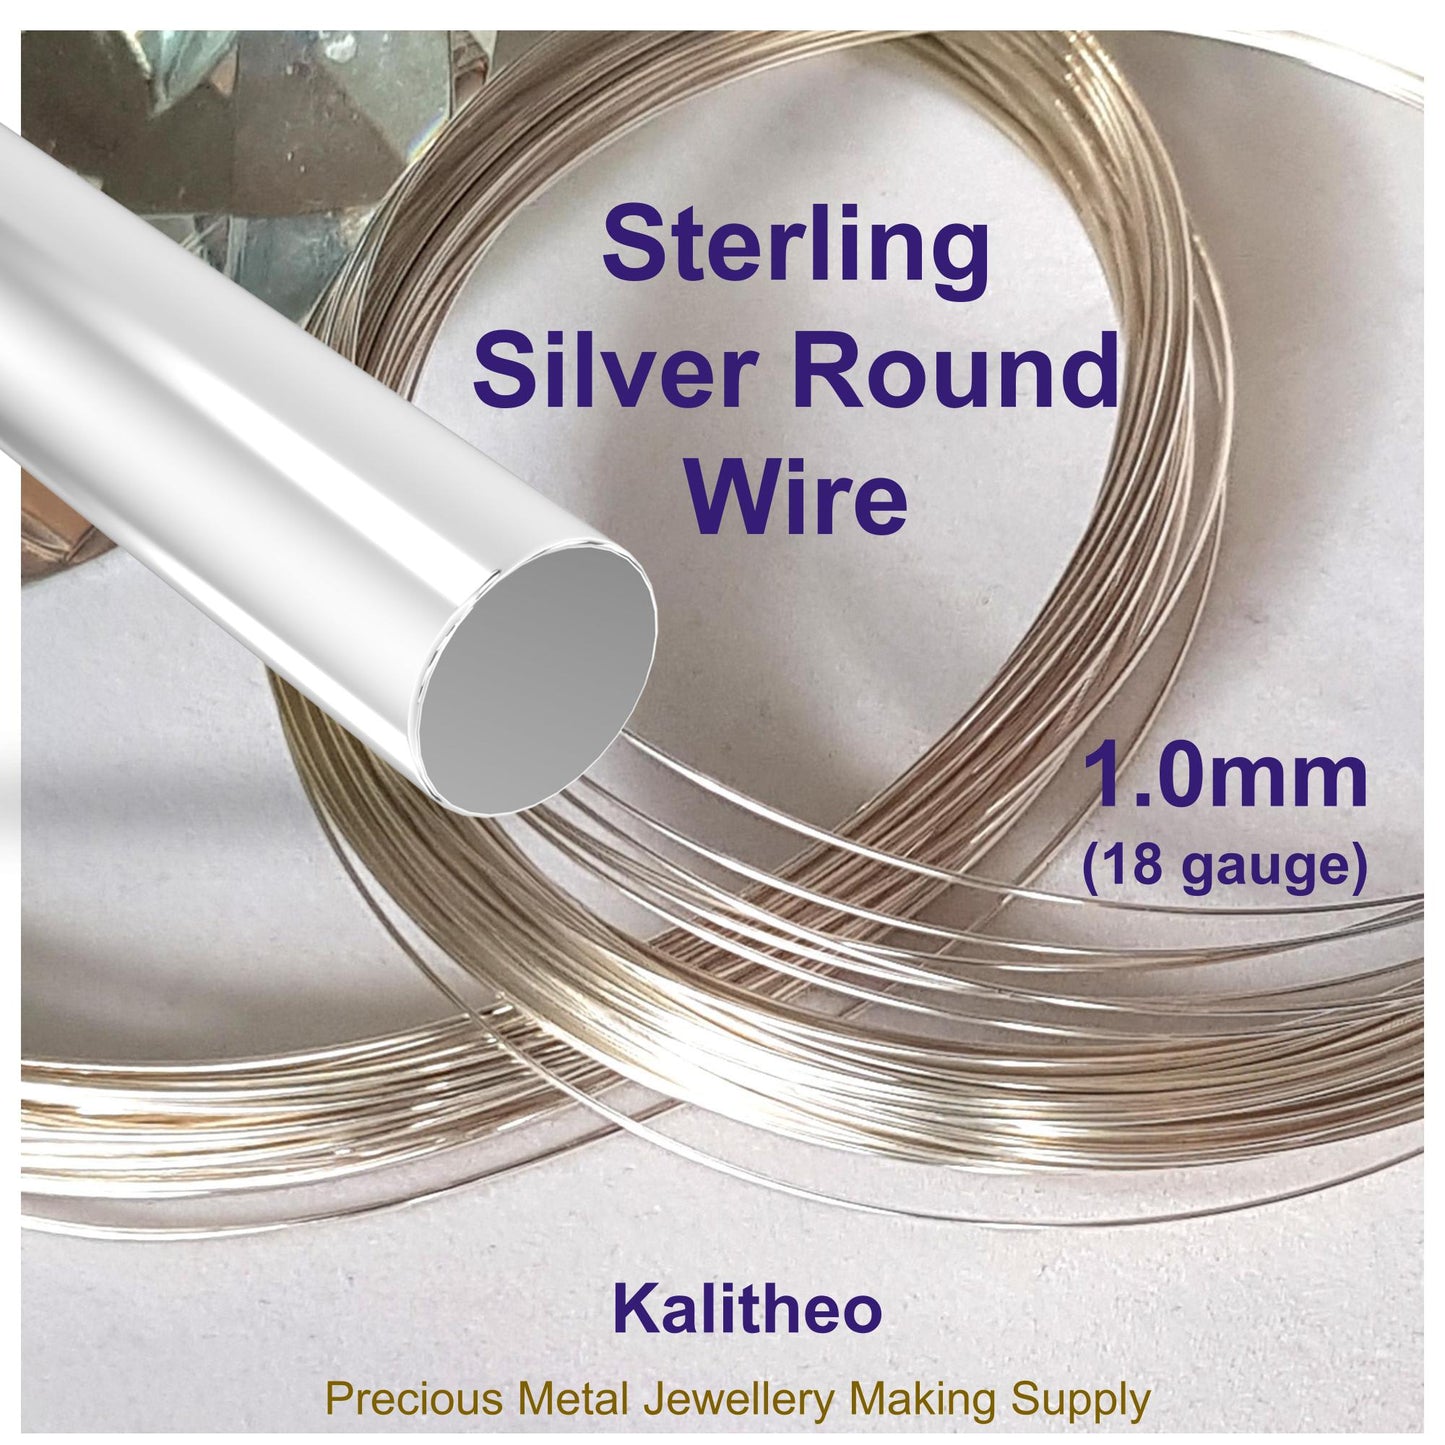 FAB Metal - 1.0mm Round Sterling Silver Wire ( 18 gauge) | Jewellery Making Supply